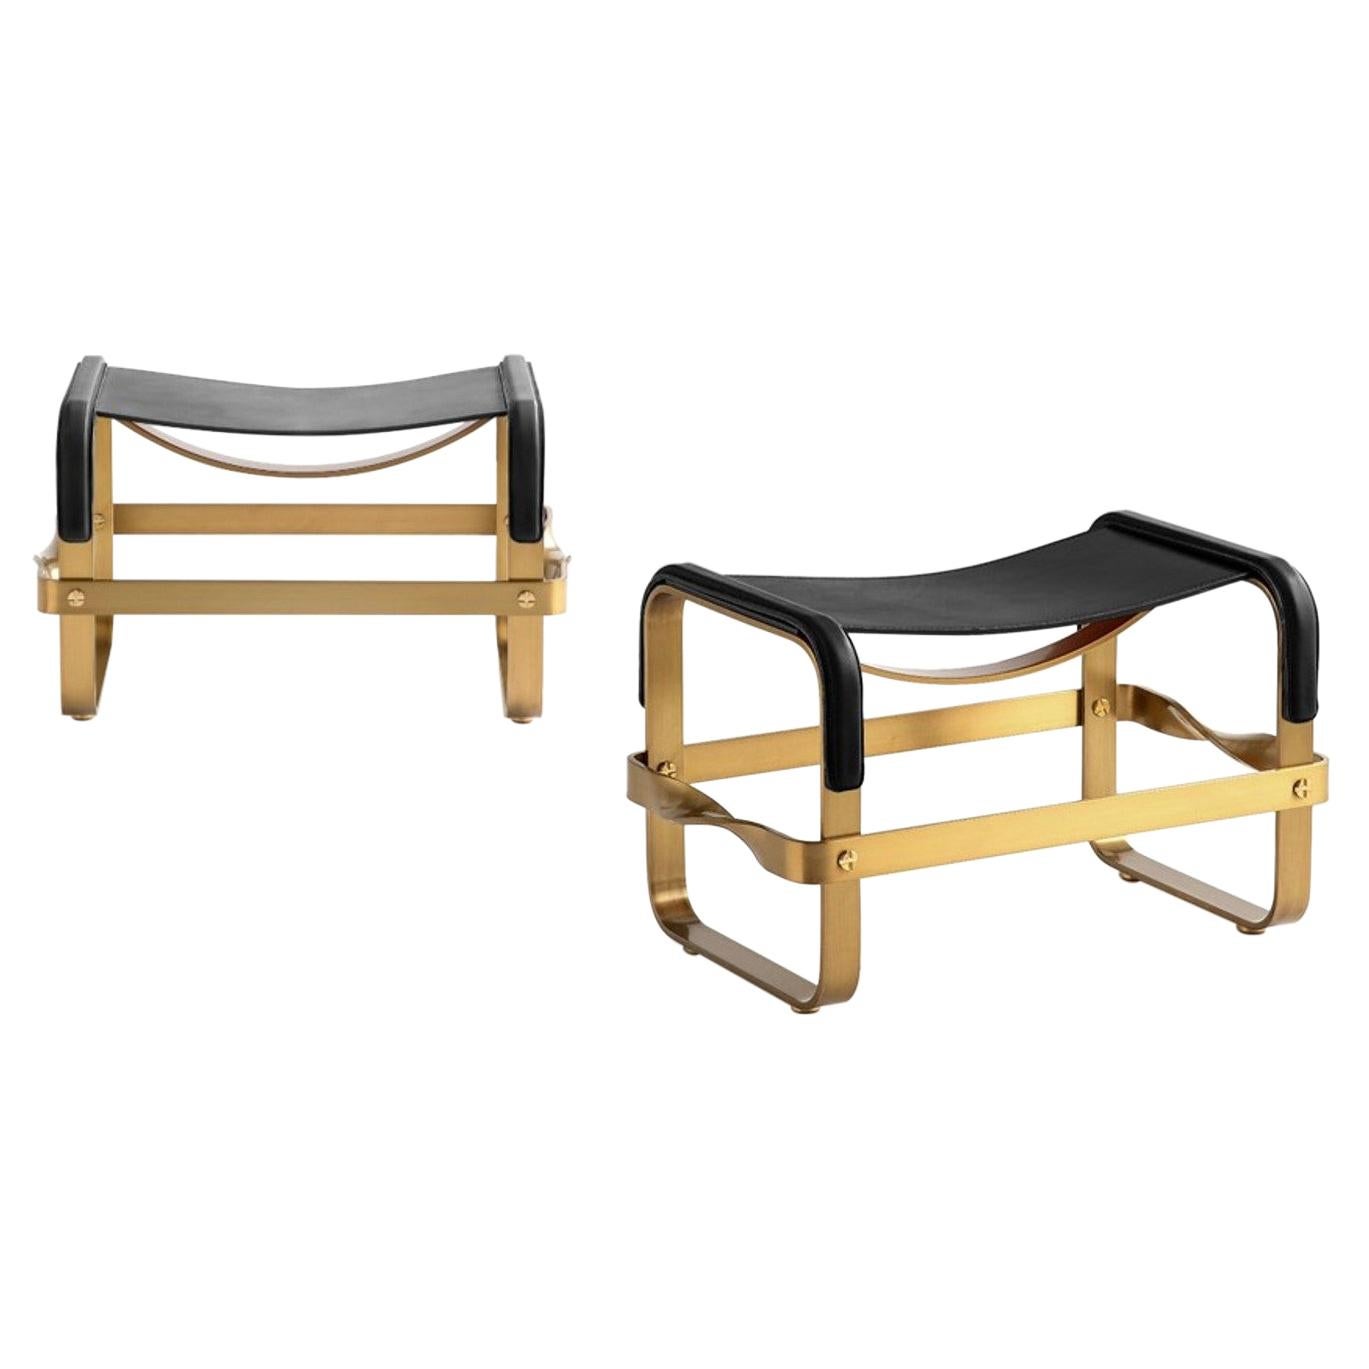 Set of 2 Footstool Aged Brass Steel & Black Leather, Contemporary Style For Sale